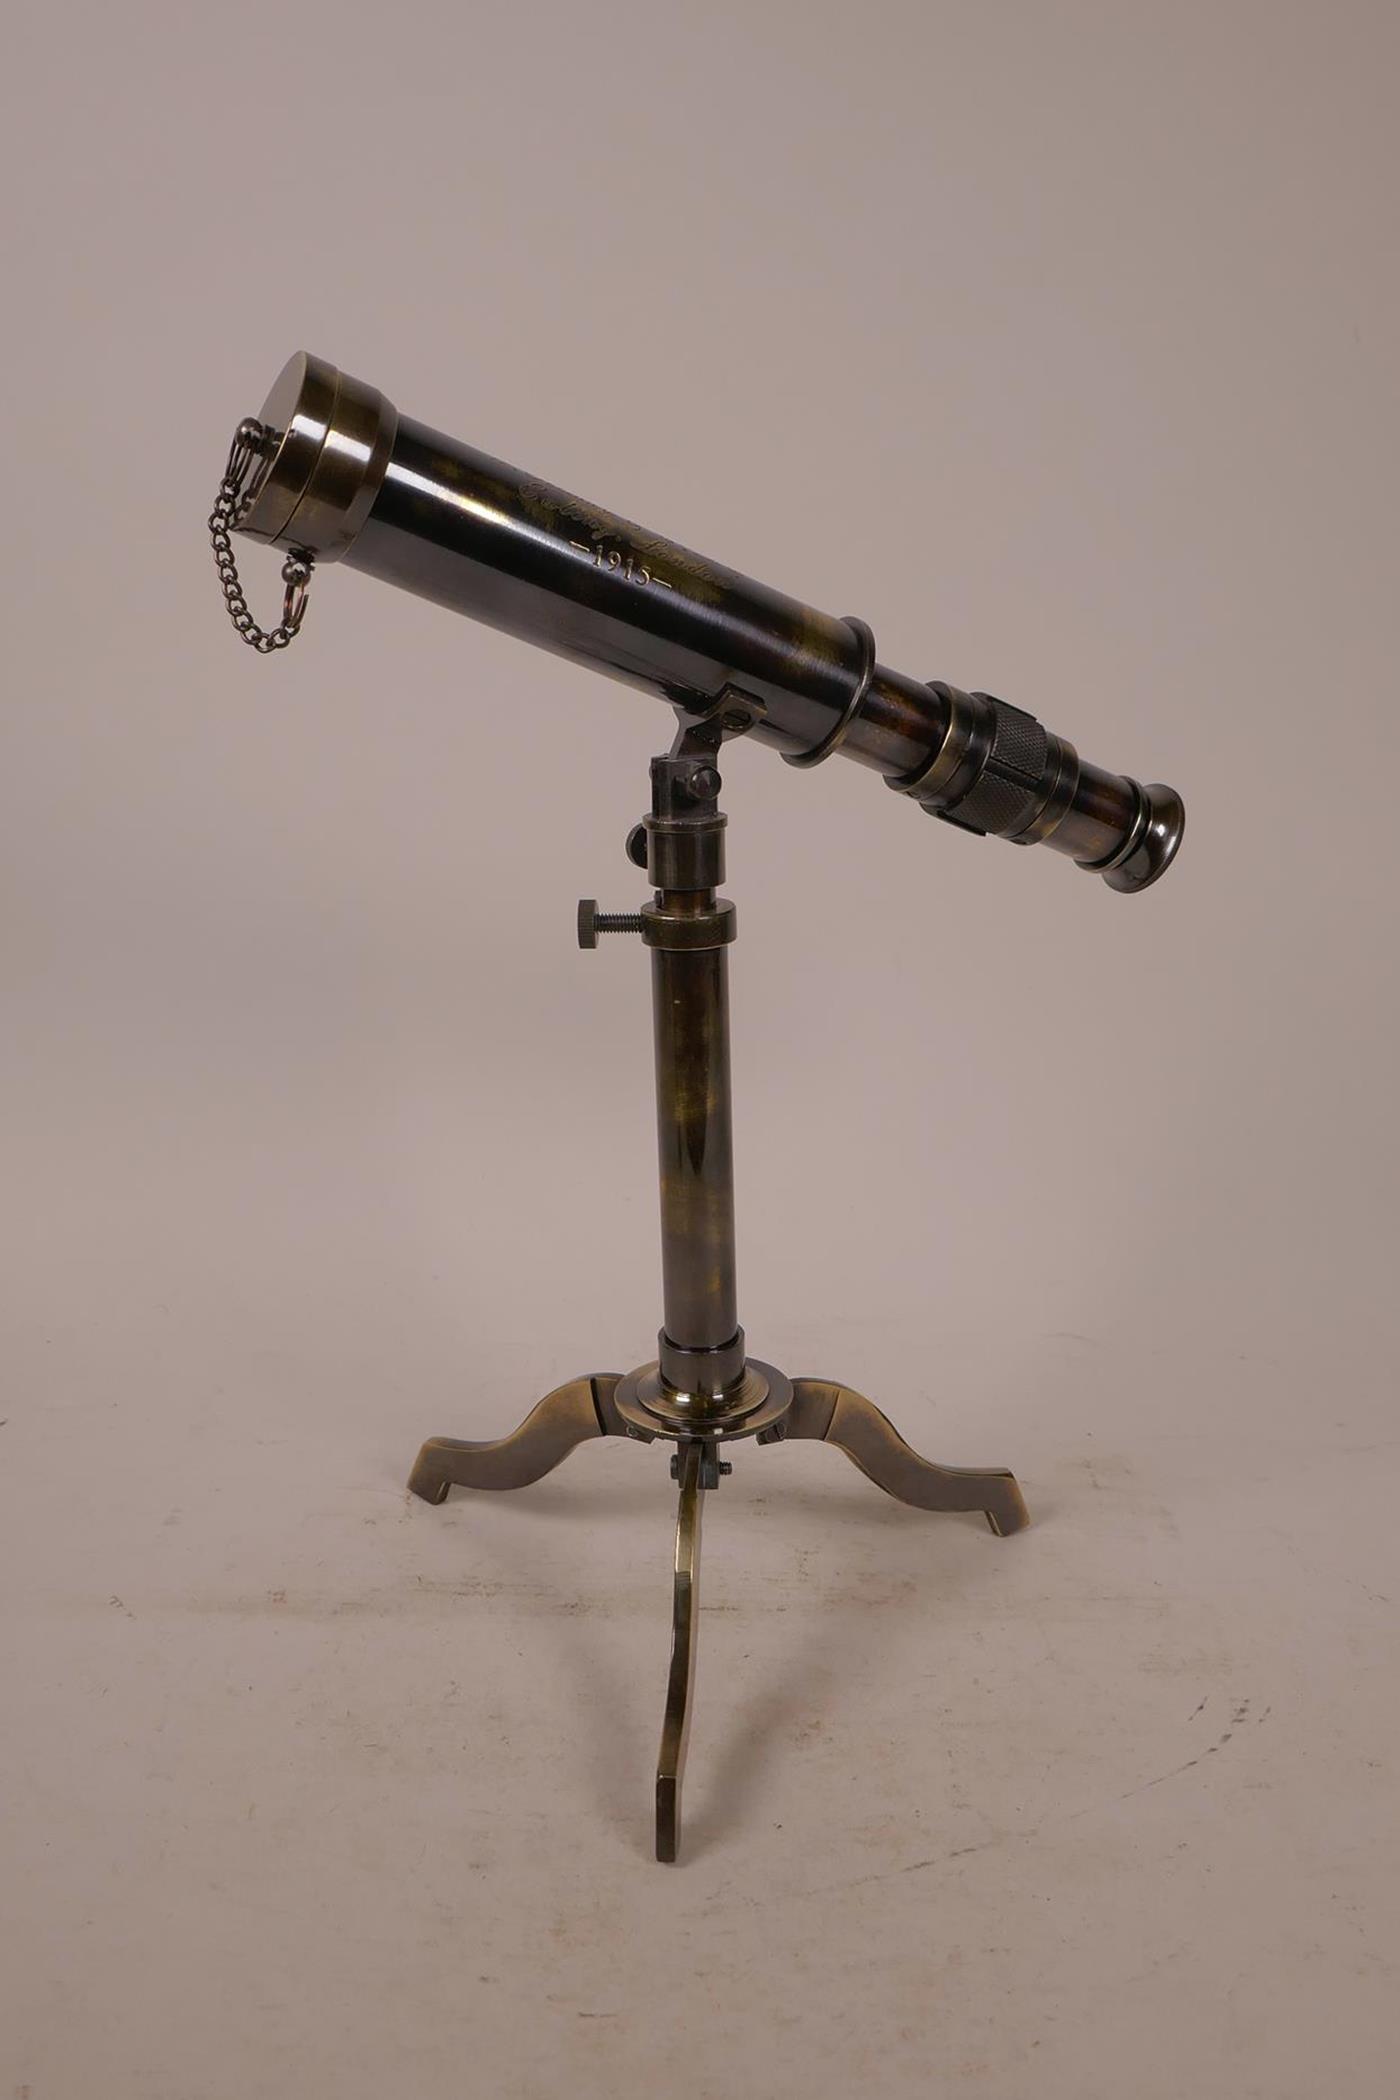 A brass reproduction telescope on tripod stand, 9½" long collapsed